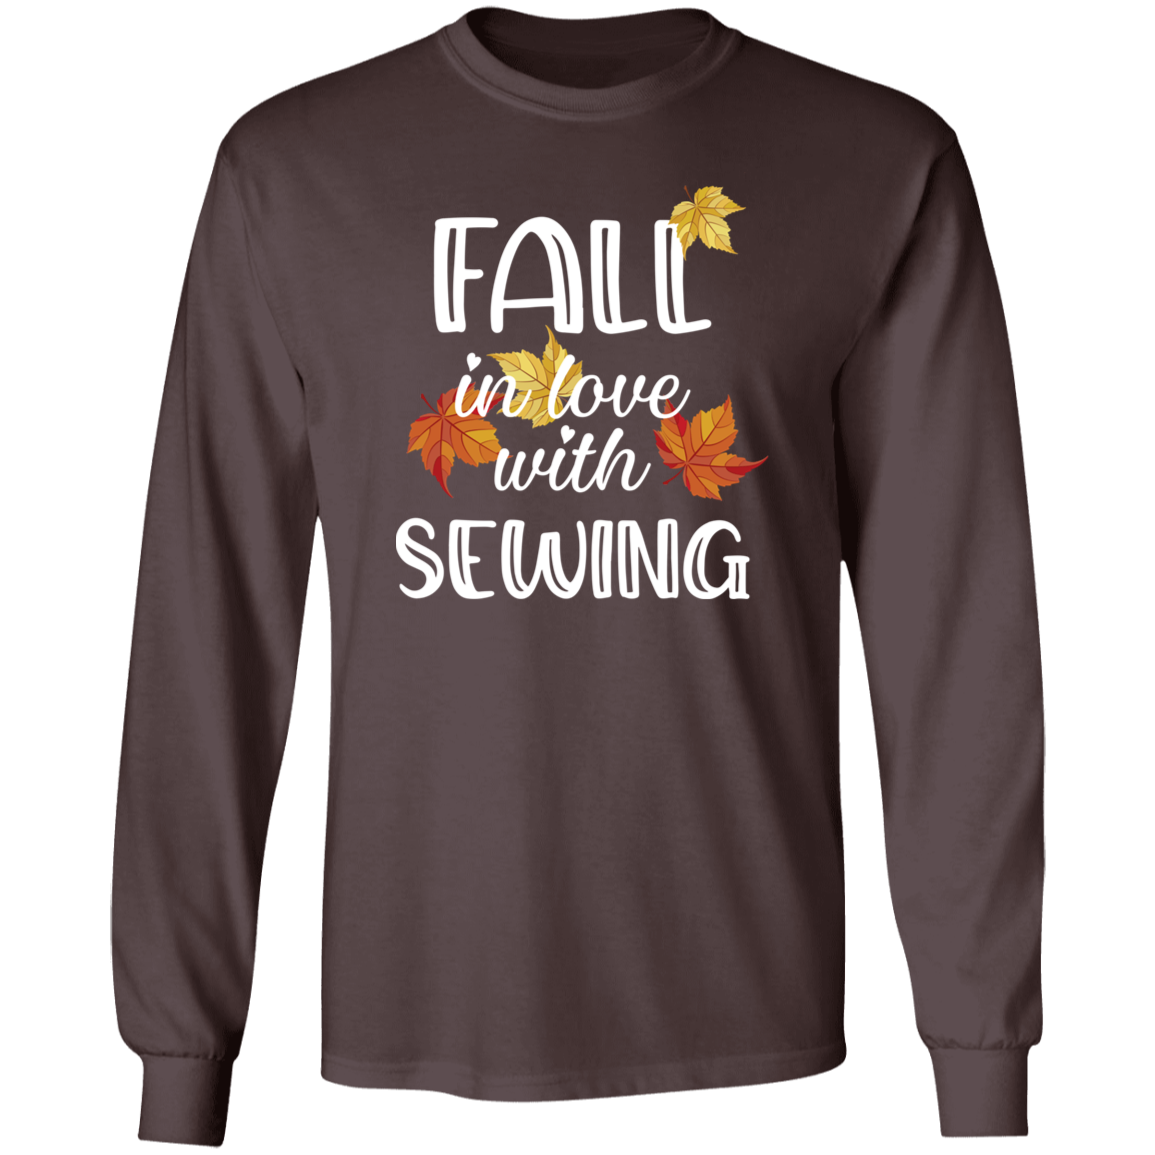 Fall in Love with Sewing LS Ultra Cotton T-Shirt